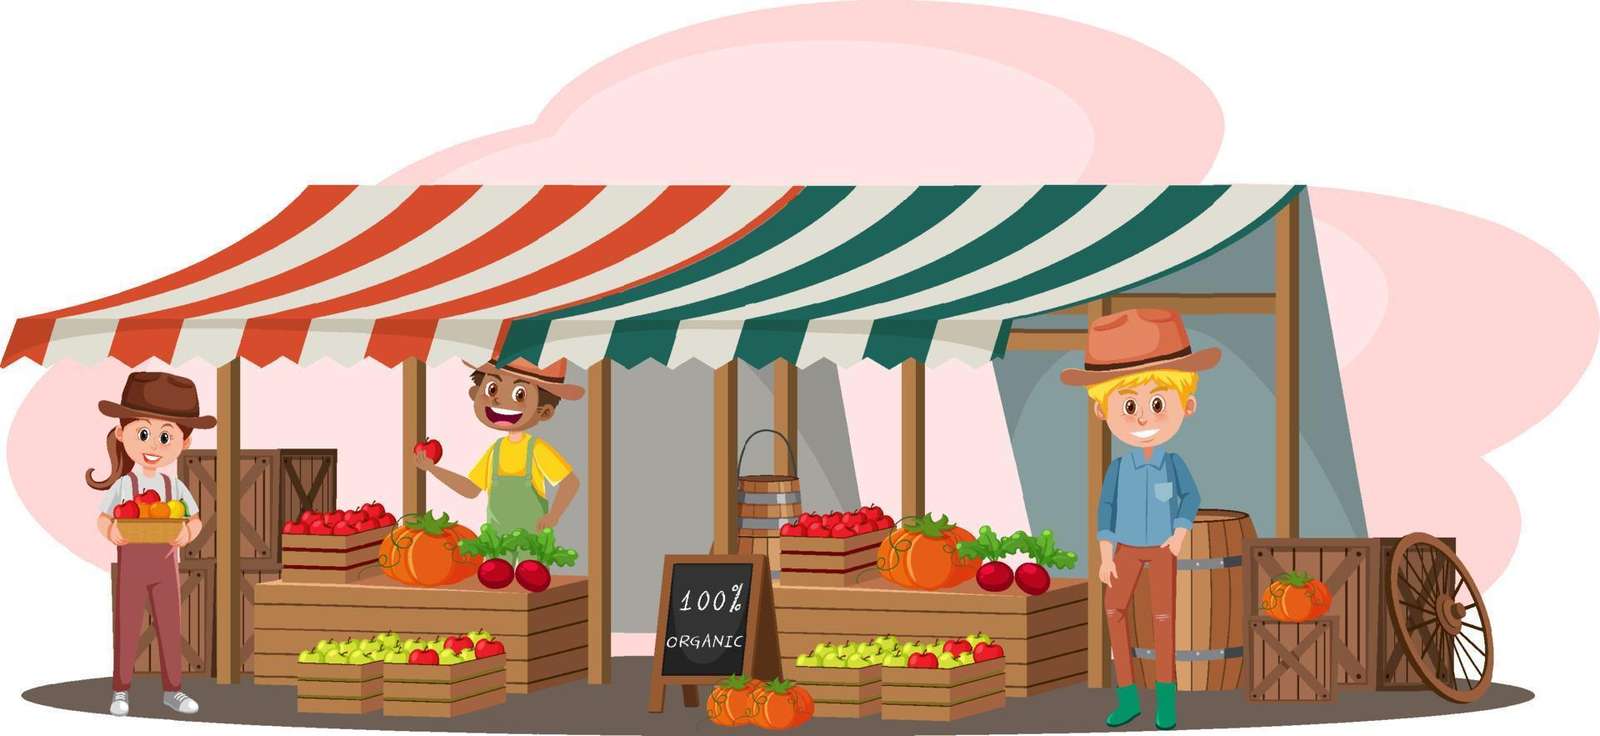 Market Store puzzle online from photo